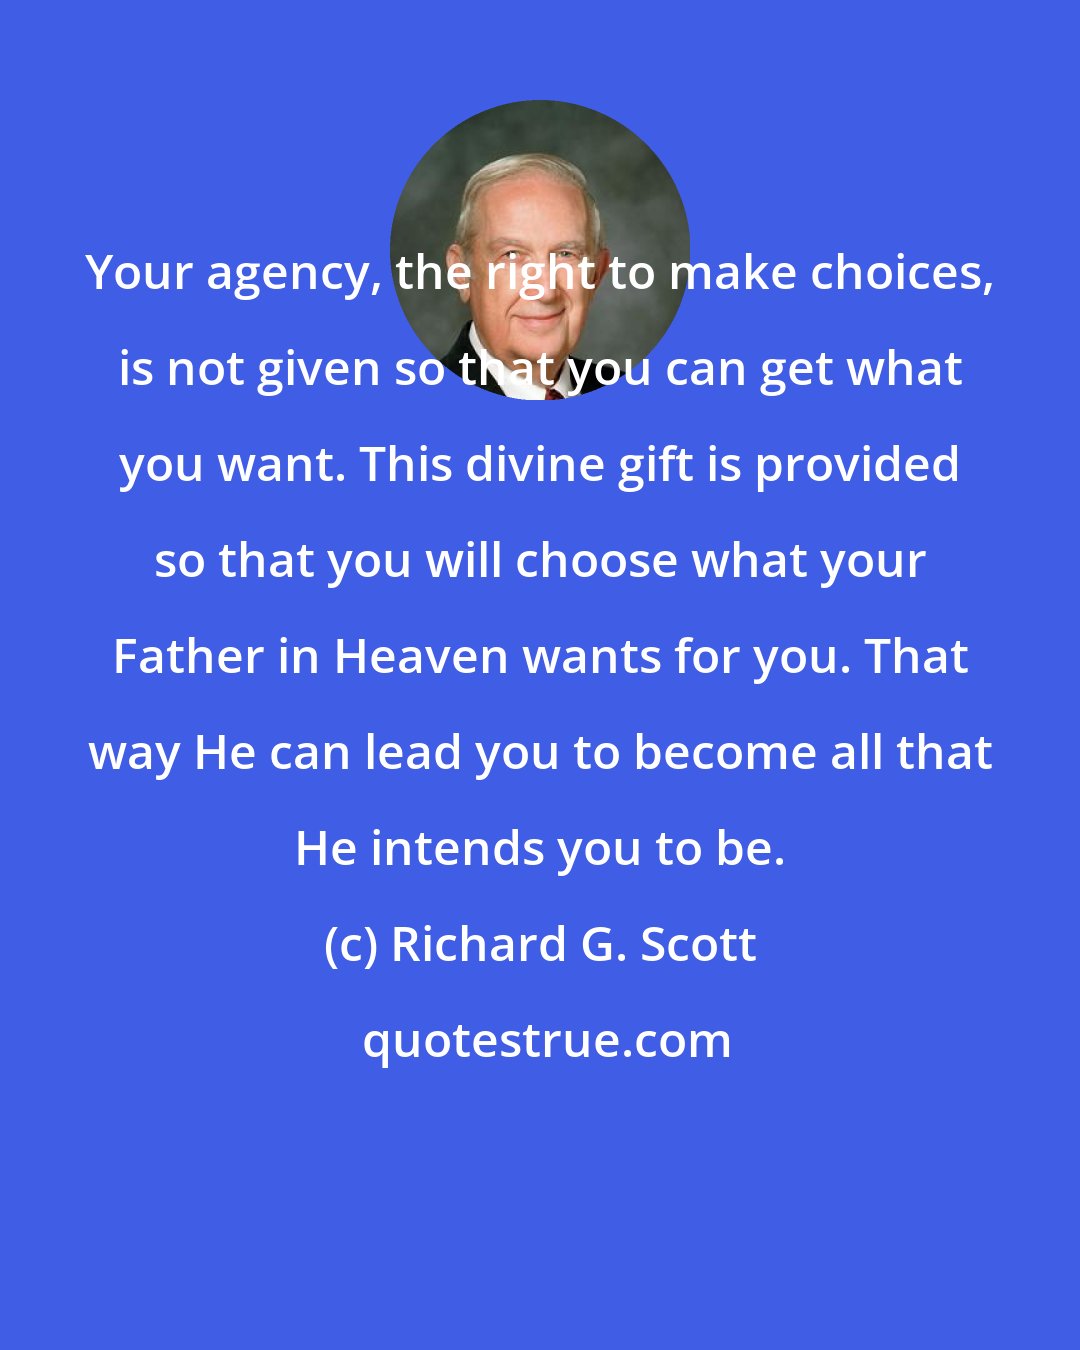 Richard G. Scott: Your agency, the right to make choices, is not given so that you can get what you want. This divine gift is provided so that you will choose what your Father in Heaven wants for you. That way He can lead you to become all that He intends you to be.